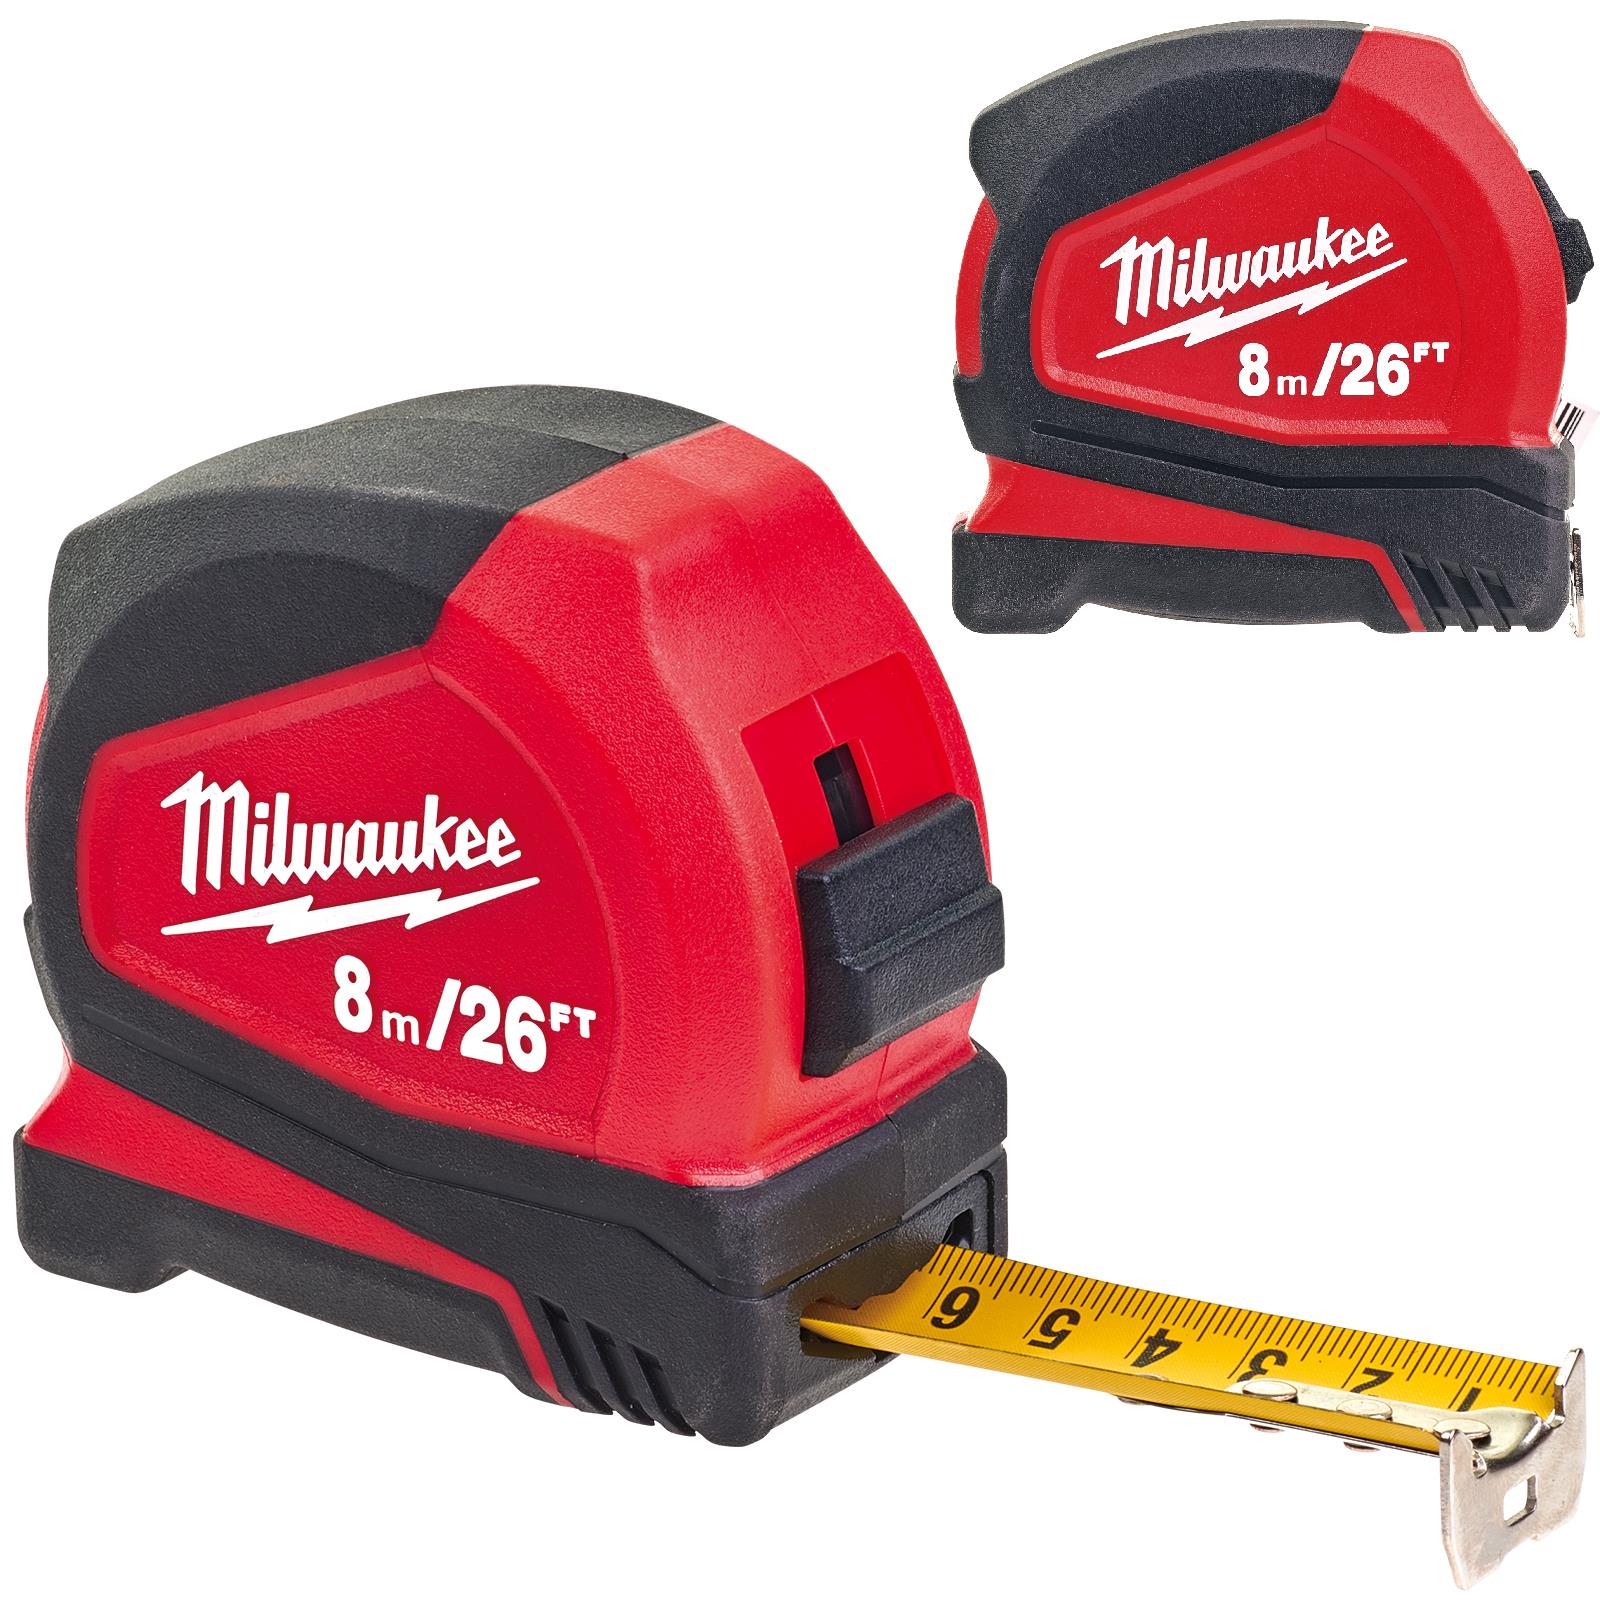 Milwaukee Tape Measure 8m 26ft Metric Imperial Pro Compact Pocket Tape 25mm Blade Width